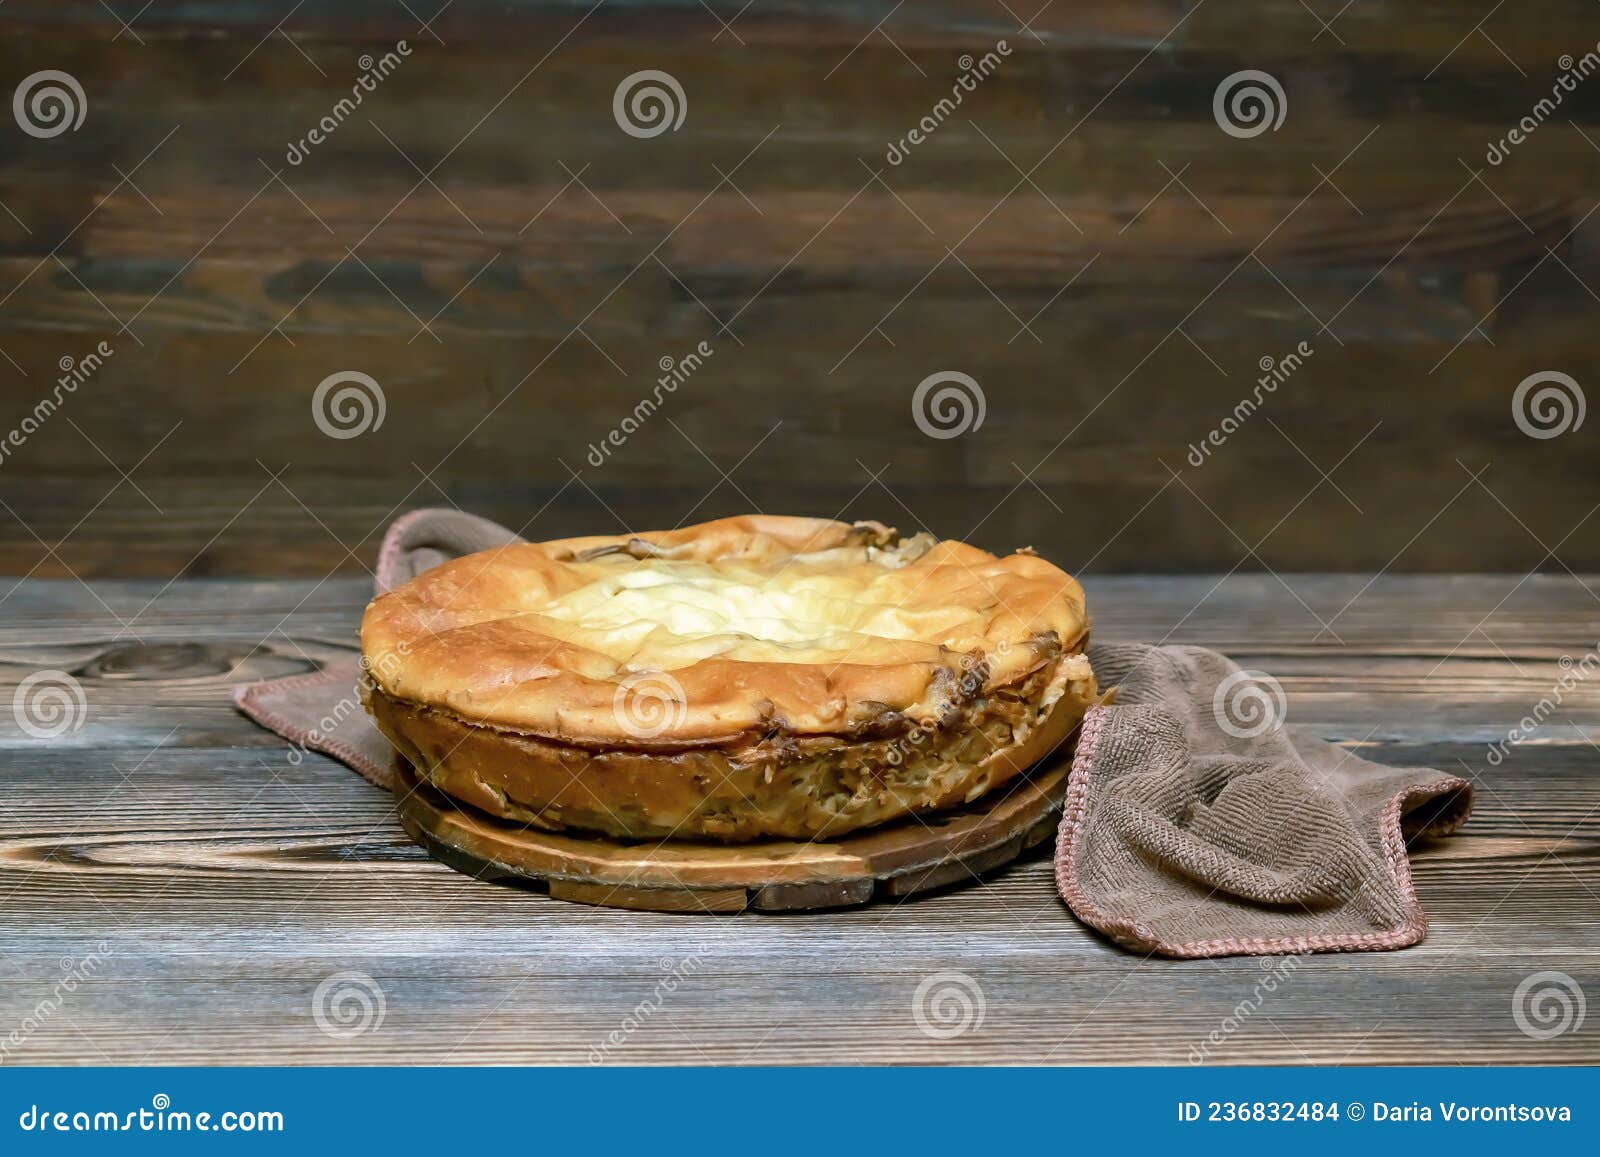 homemade cabbage vegetable pie, tart on wooden rustic table. cooking baking pastry receipe. autumn winter vegetarian